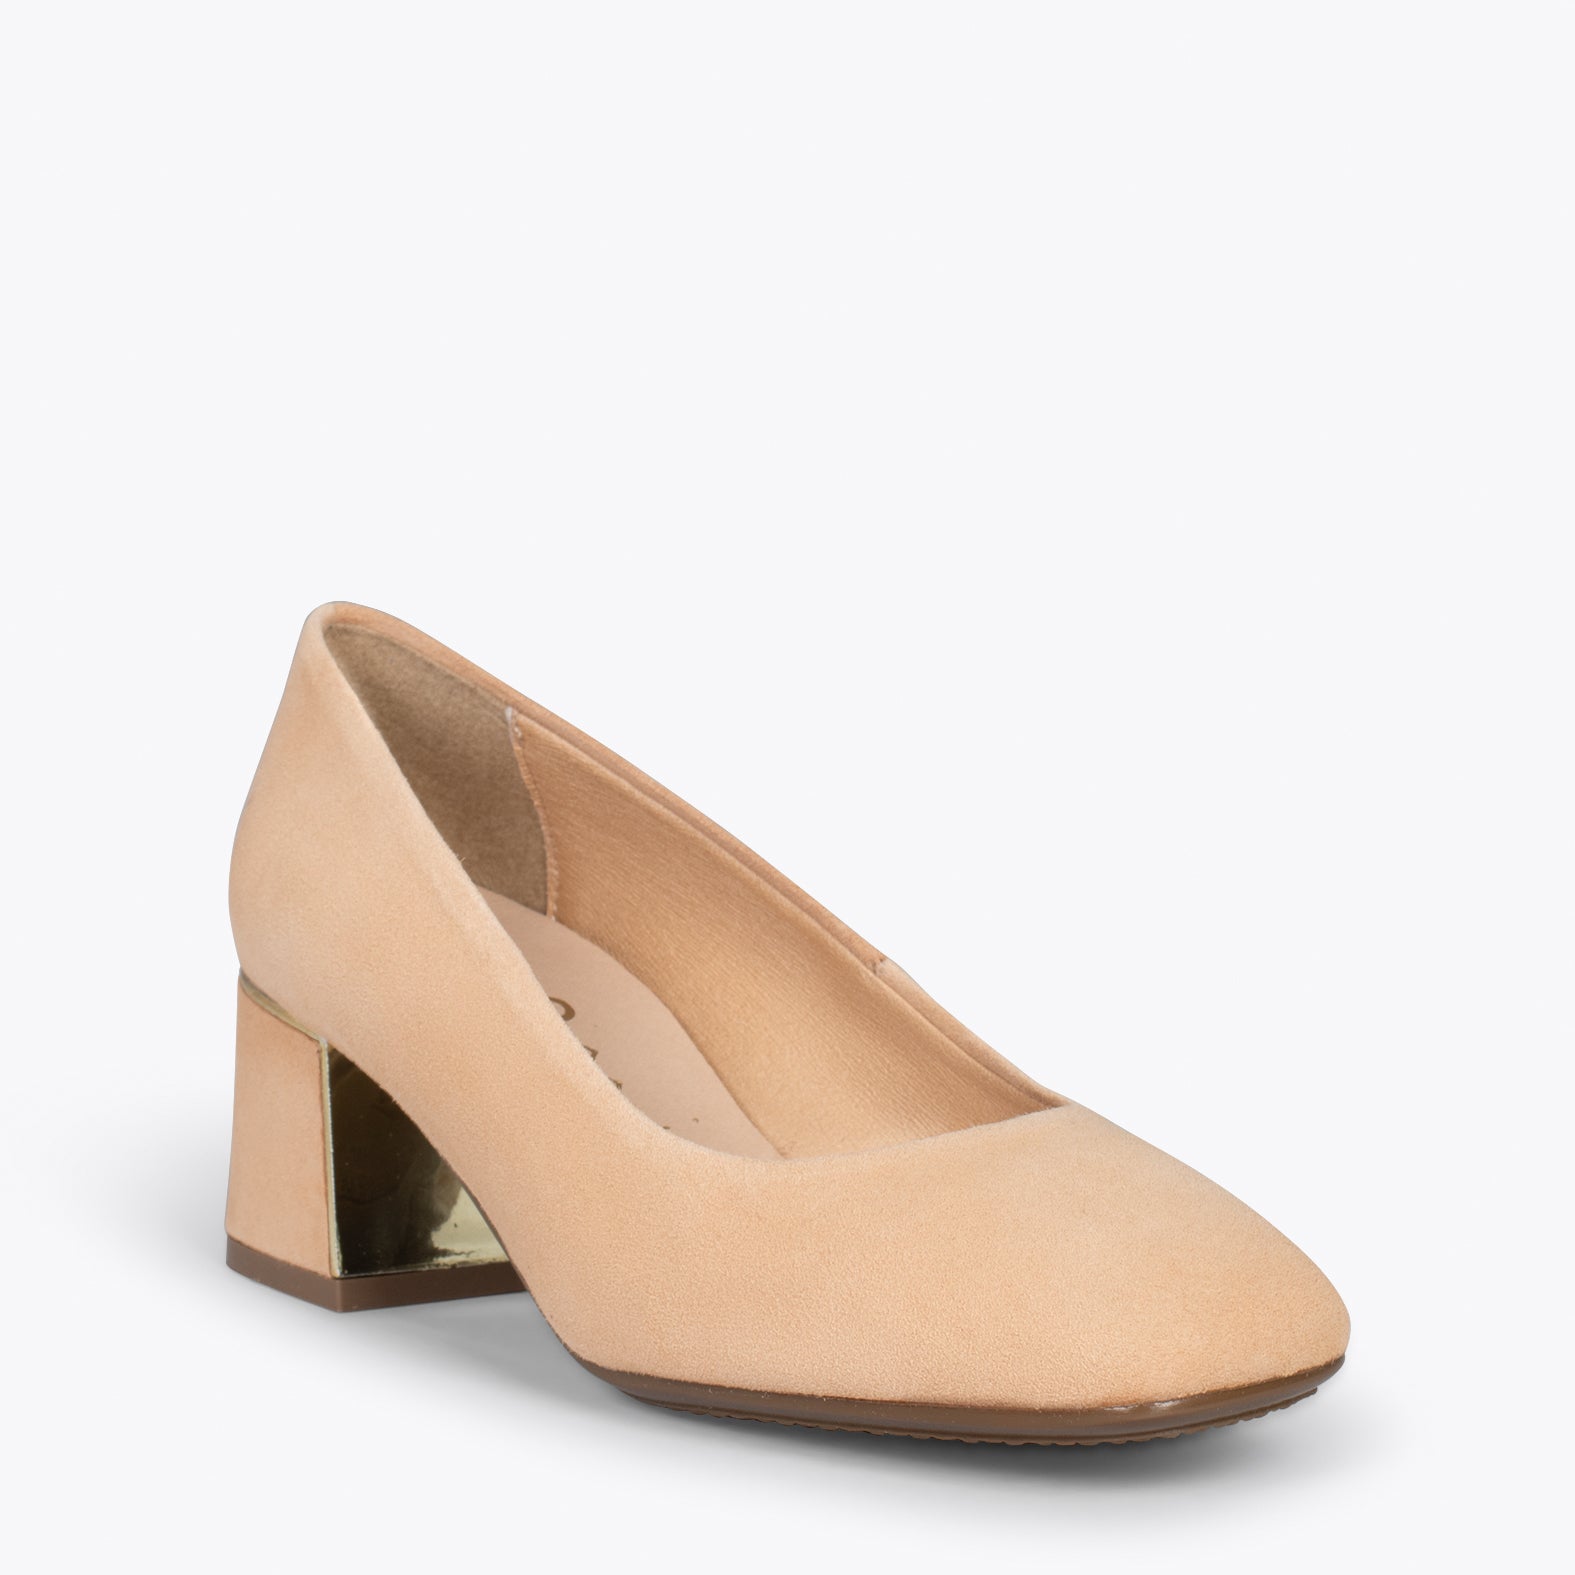 FEMME – CAMEL mid heel shoes with square toe